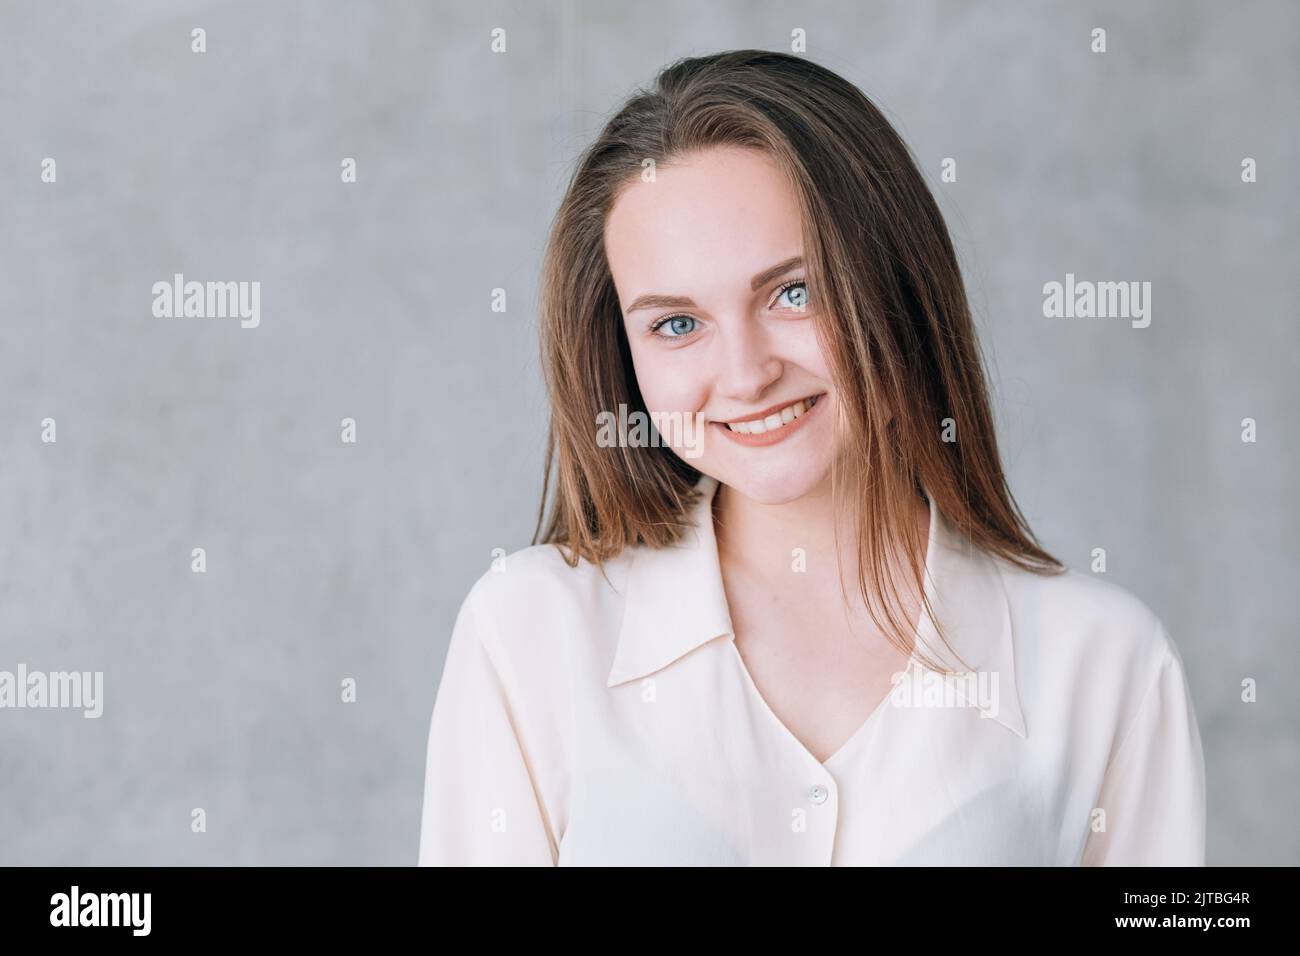 smiling young woman youth beauty copy space Stock Photo